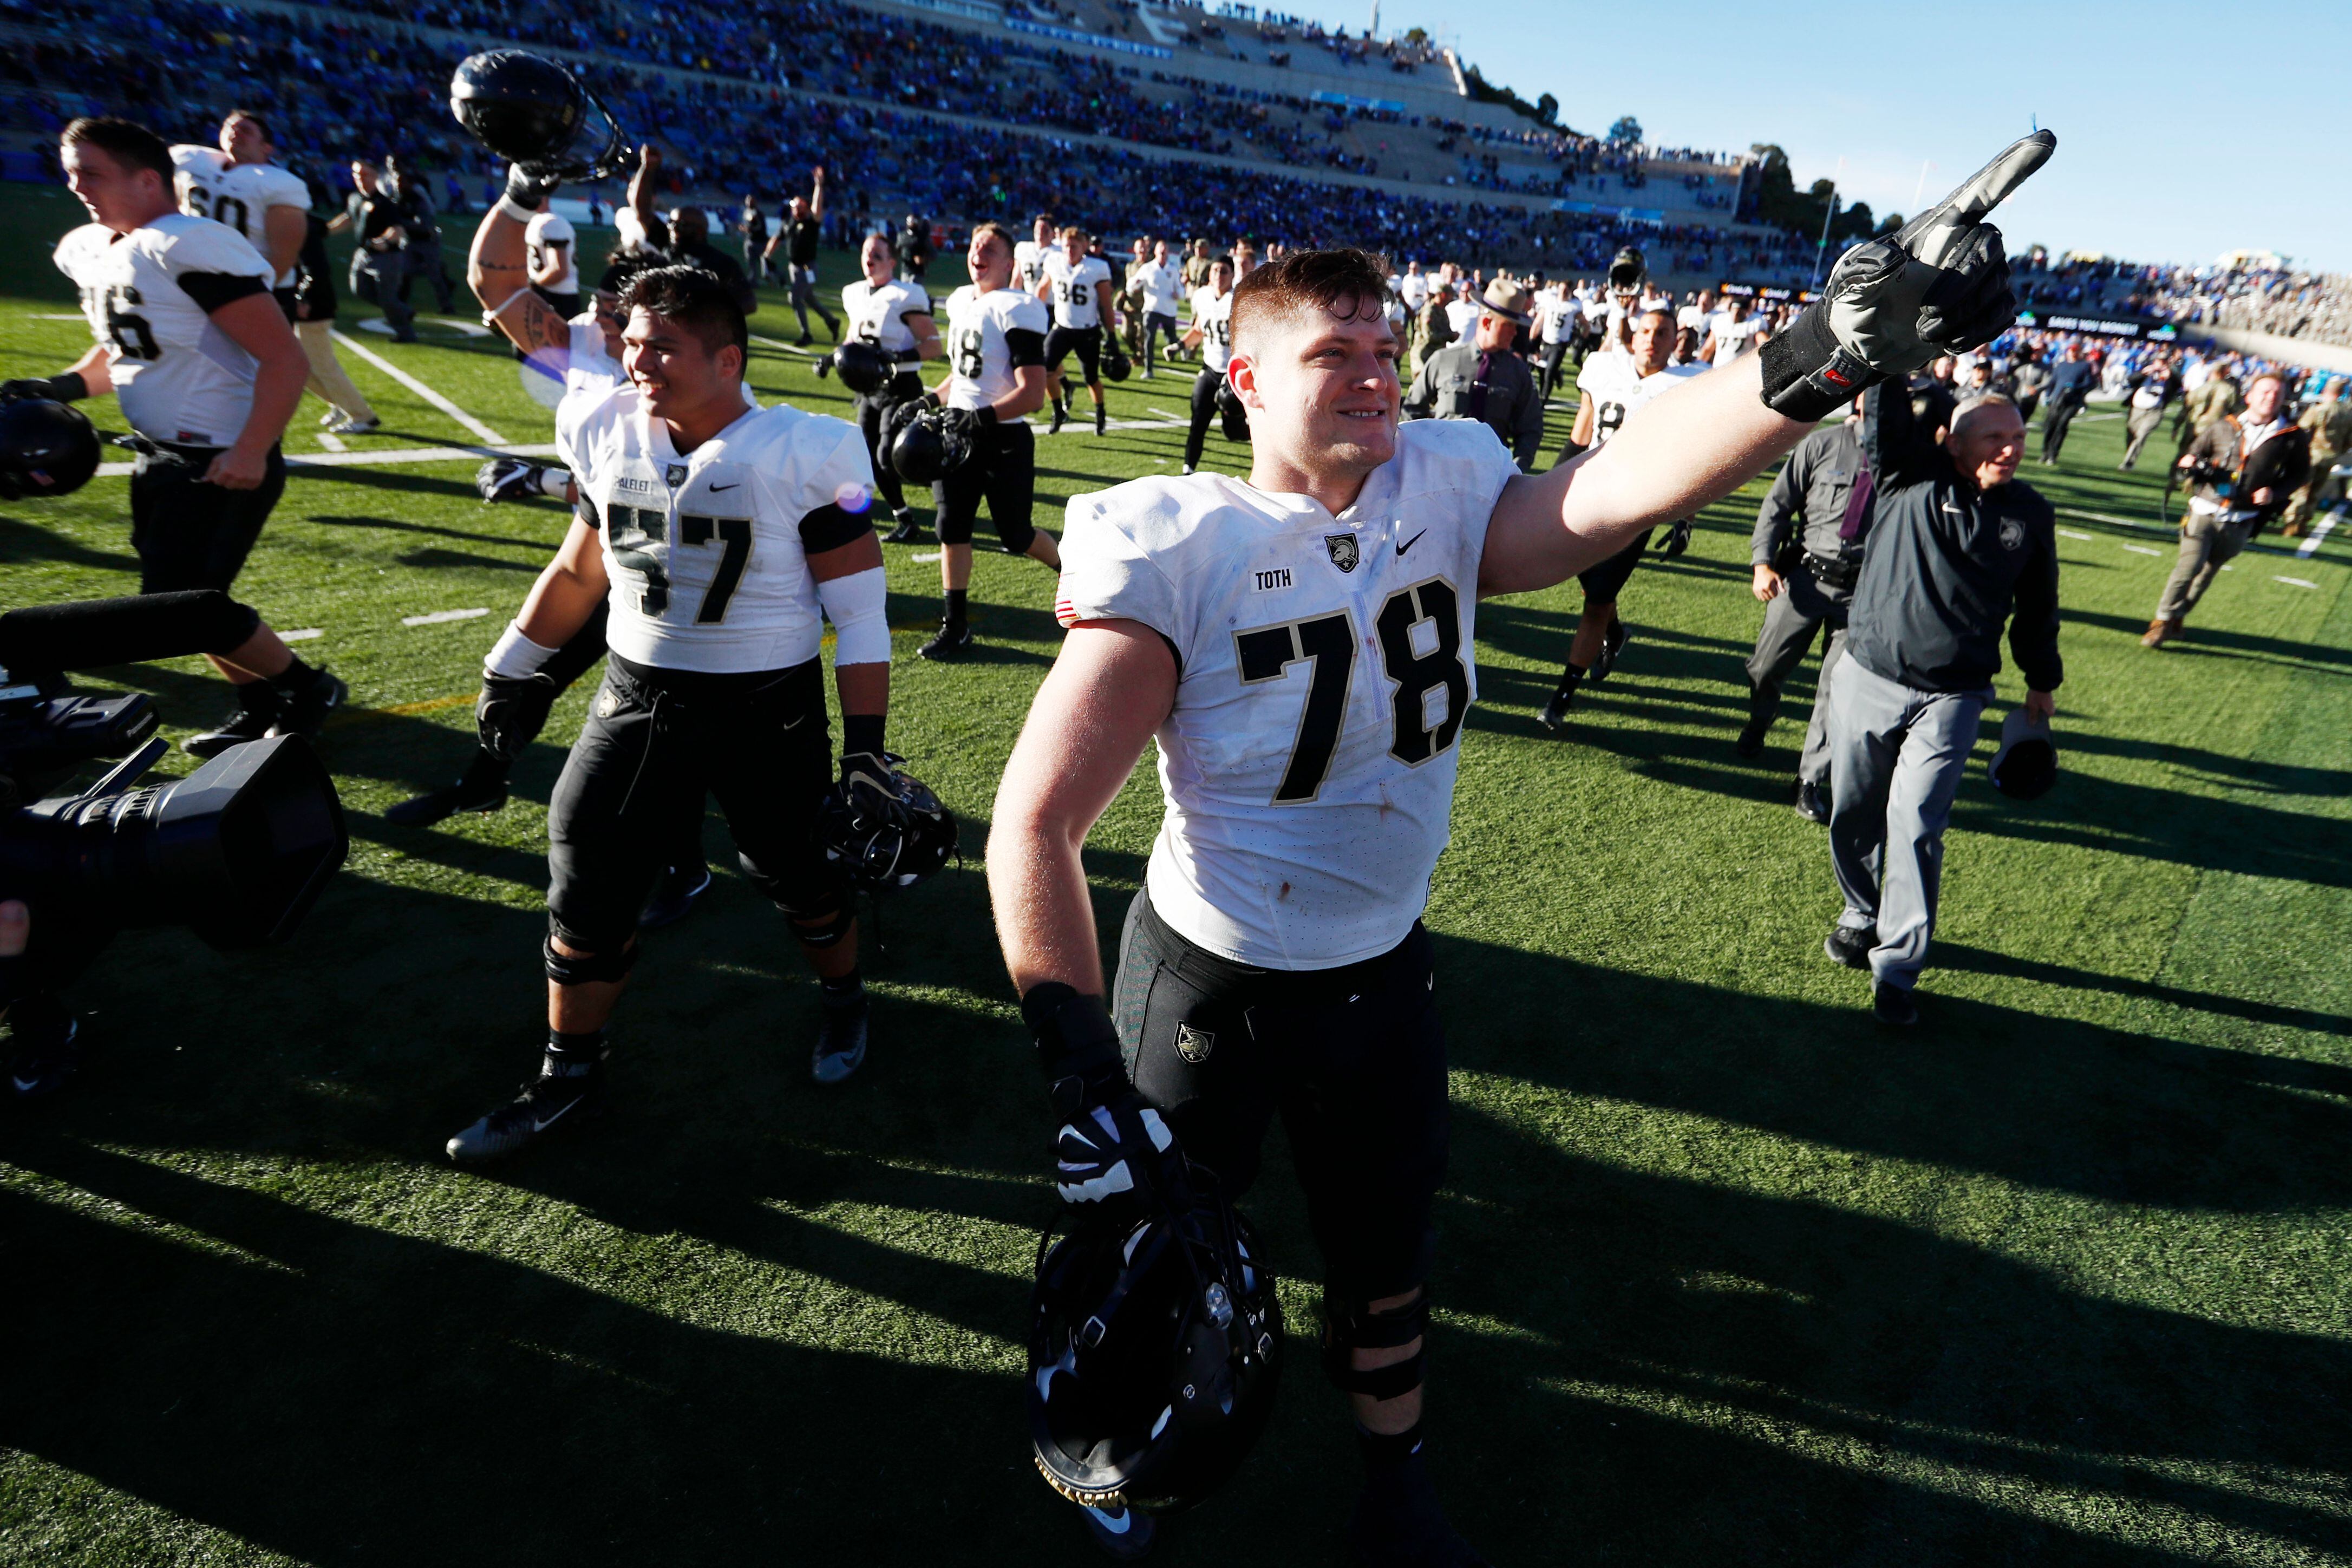 Military comes before NFL for West Ashley's Brett Toth, 1st Army